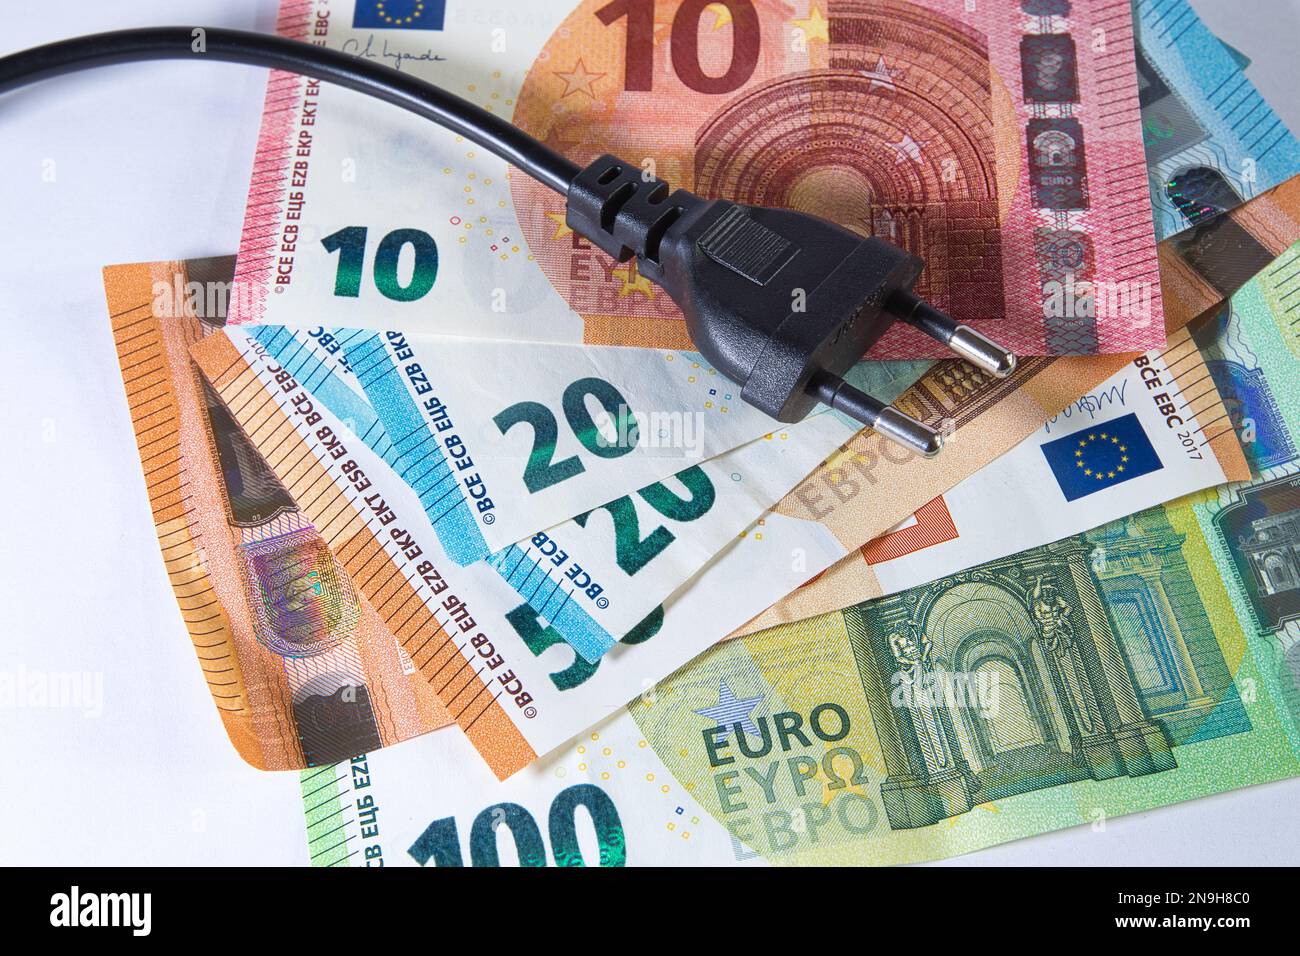 european money in a pile with connector plug illustrating rising energy costs Stock Photo